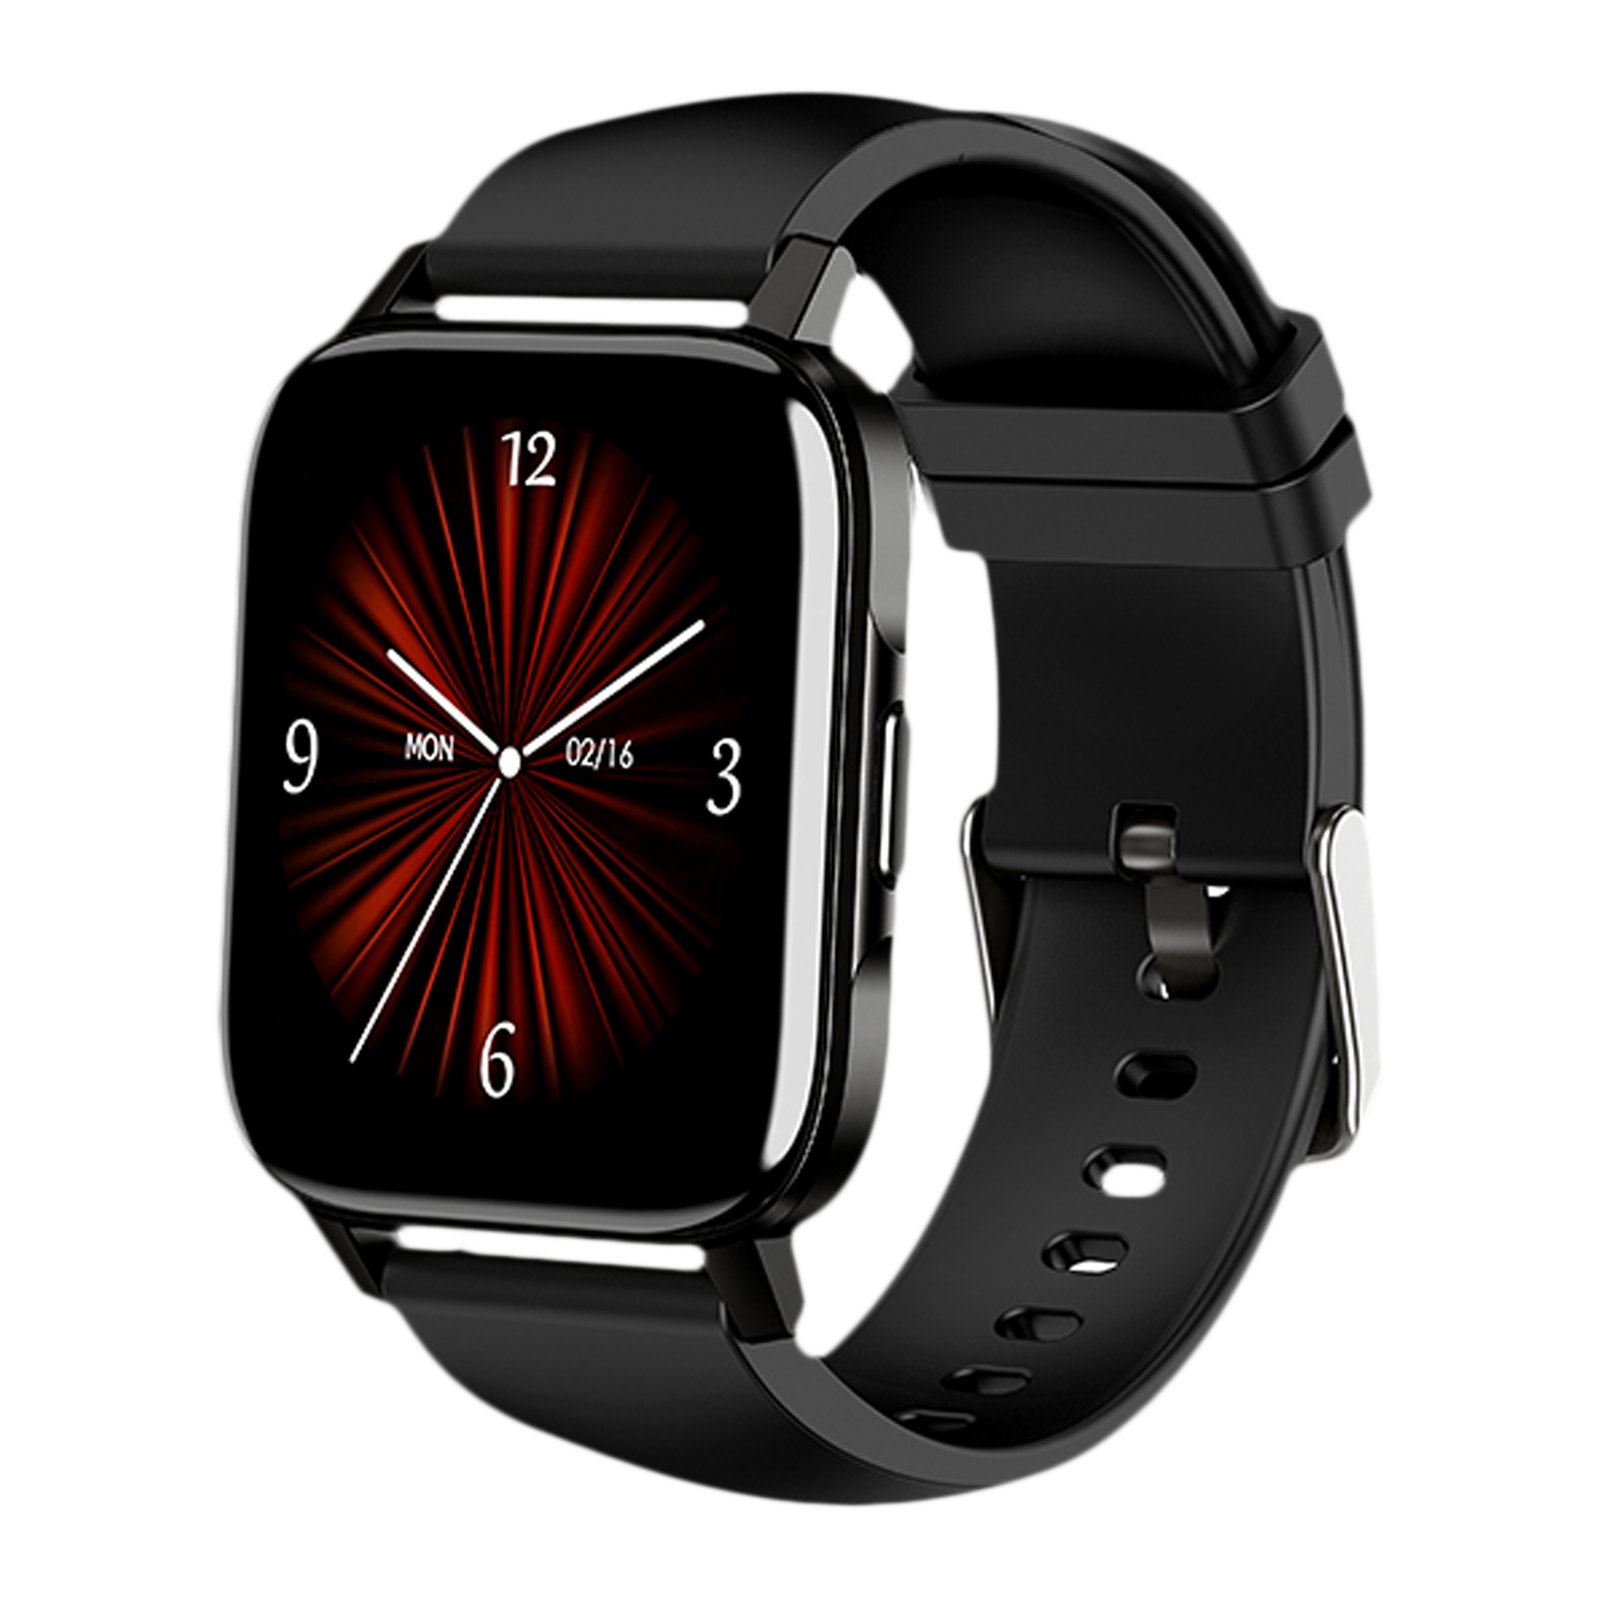 TAGG Verve Neo Smart Watch Price, Offers in India + Cashback | 2024